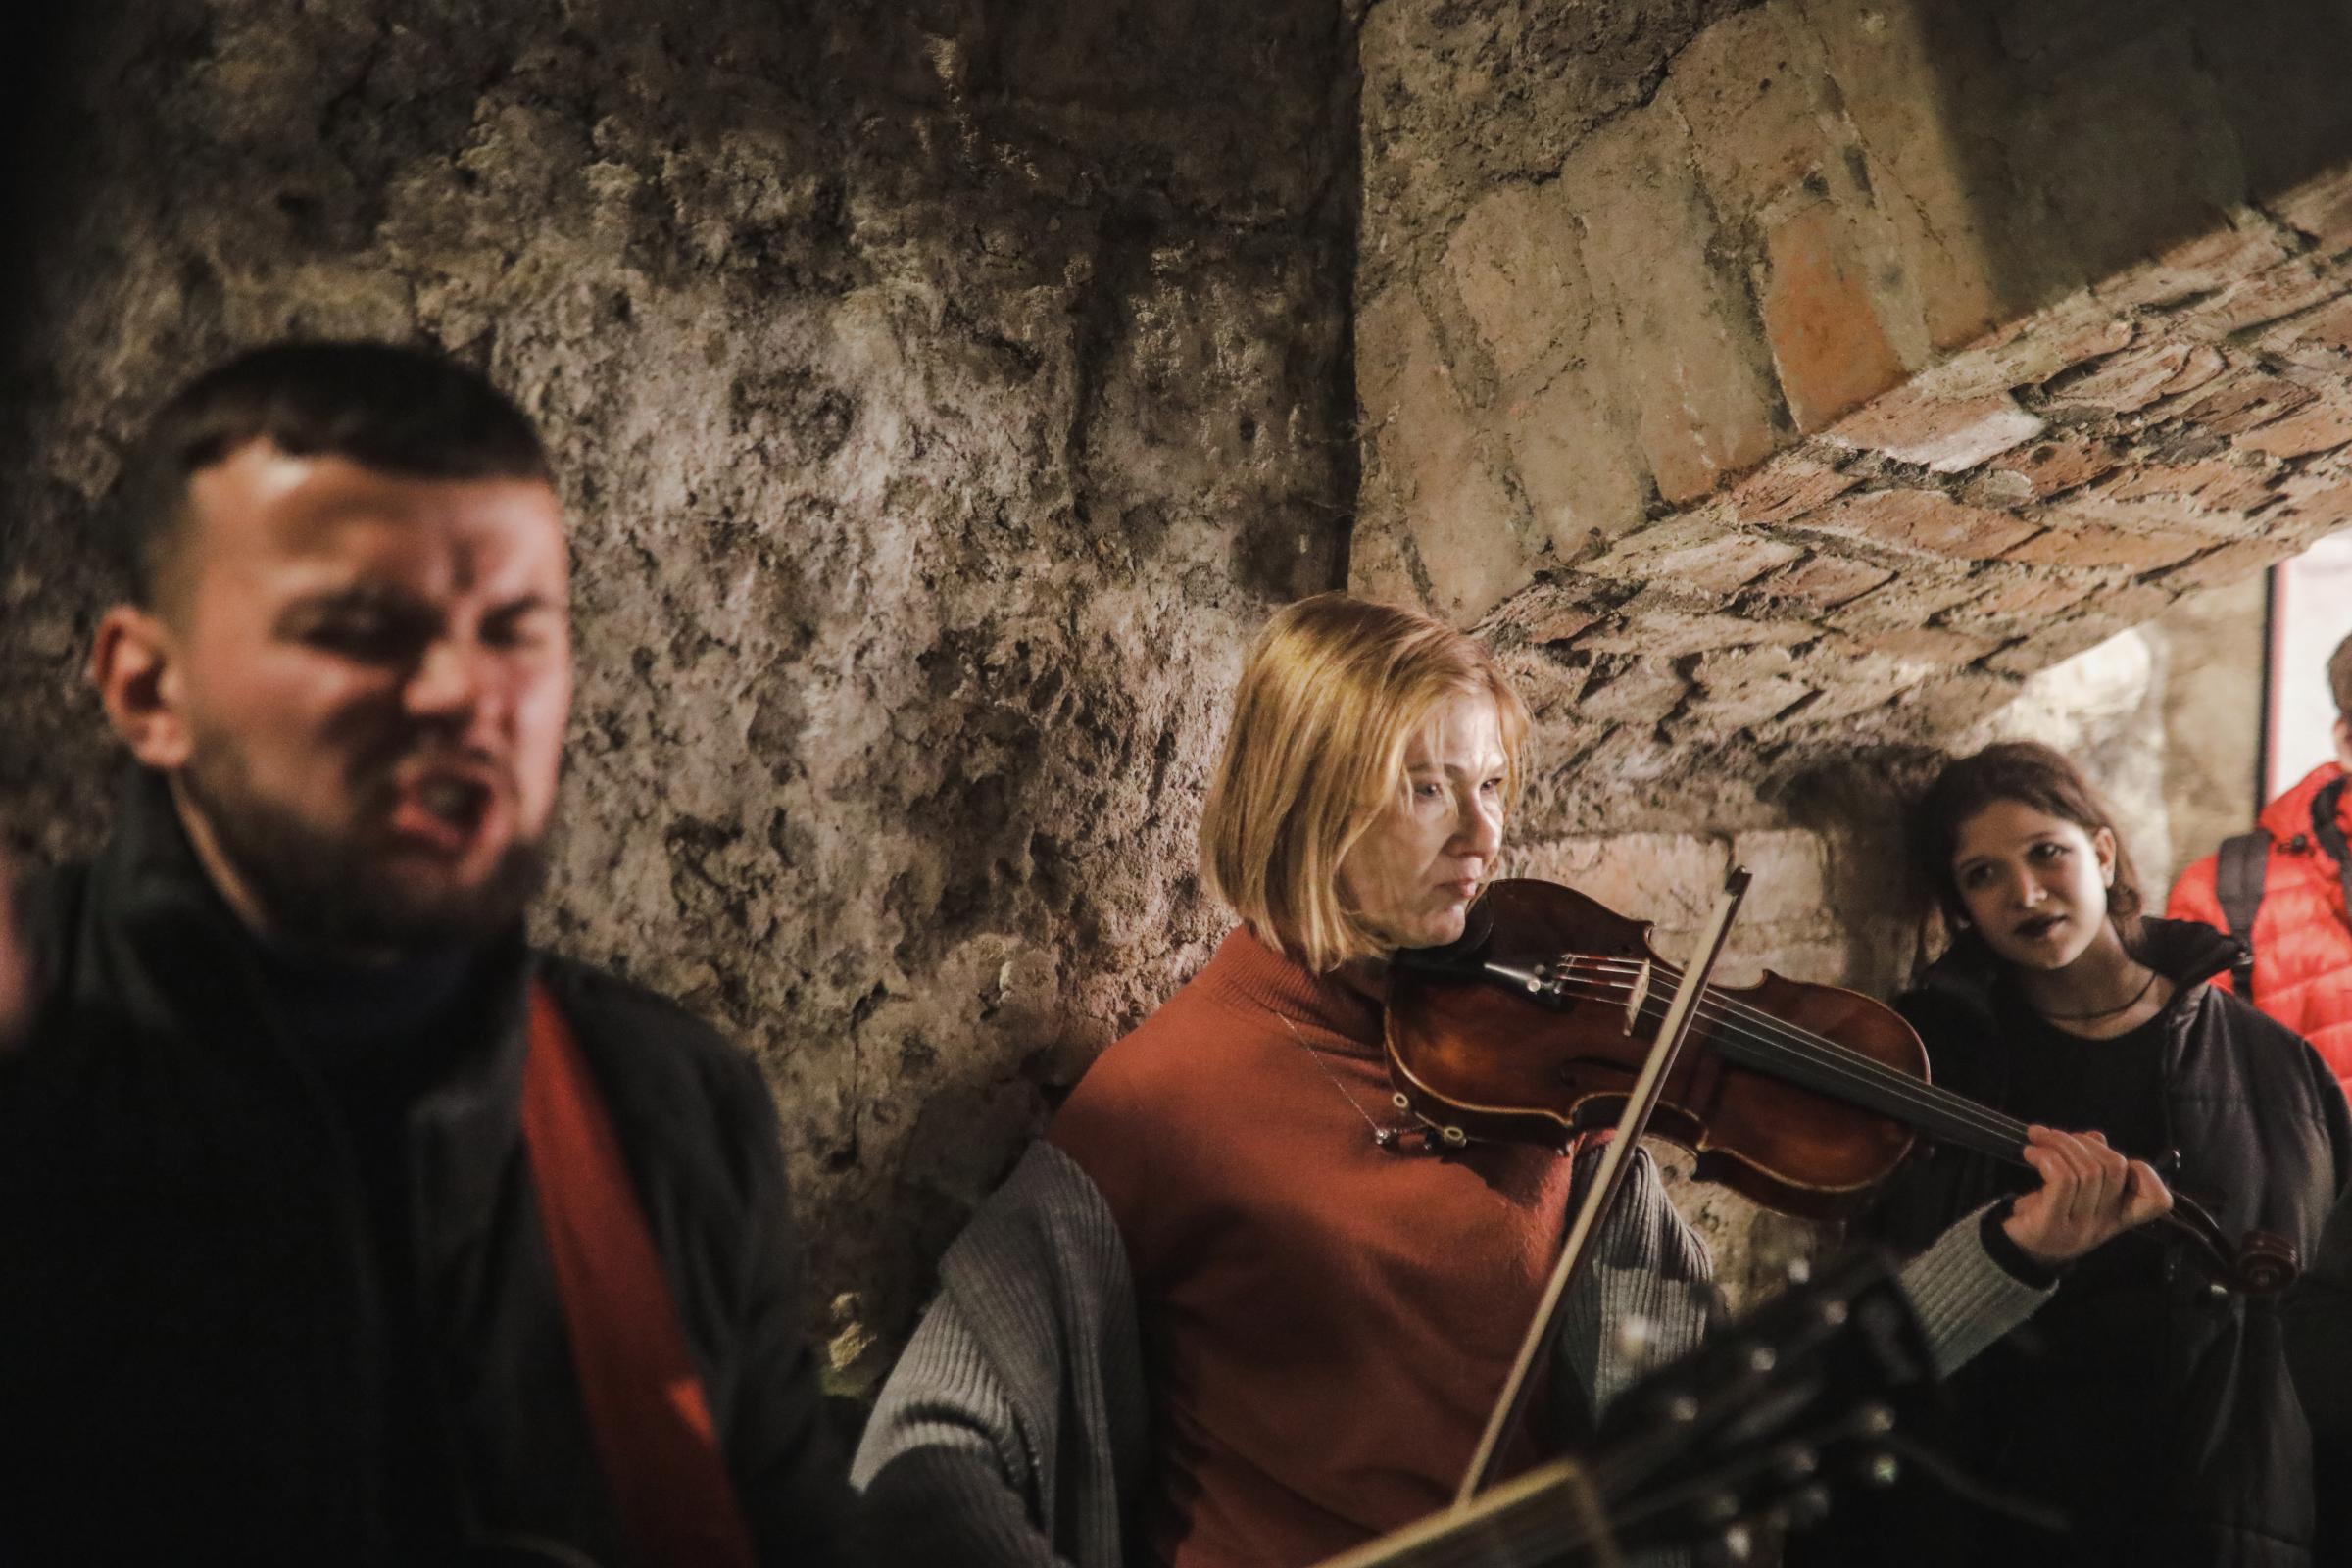 Anadolu/Getty Musicians play music in Lviv to comfort people displaced from war zones